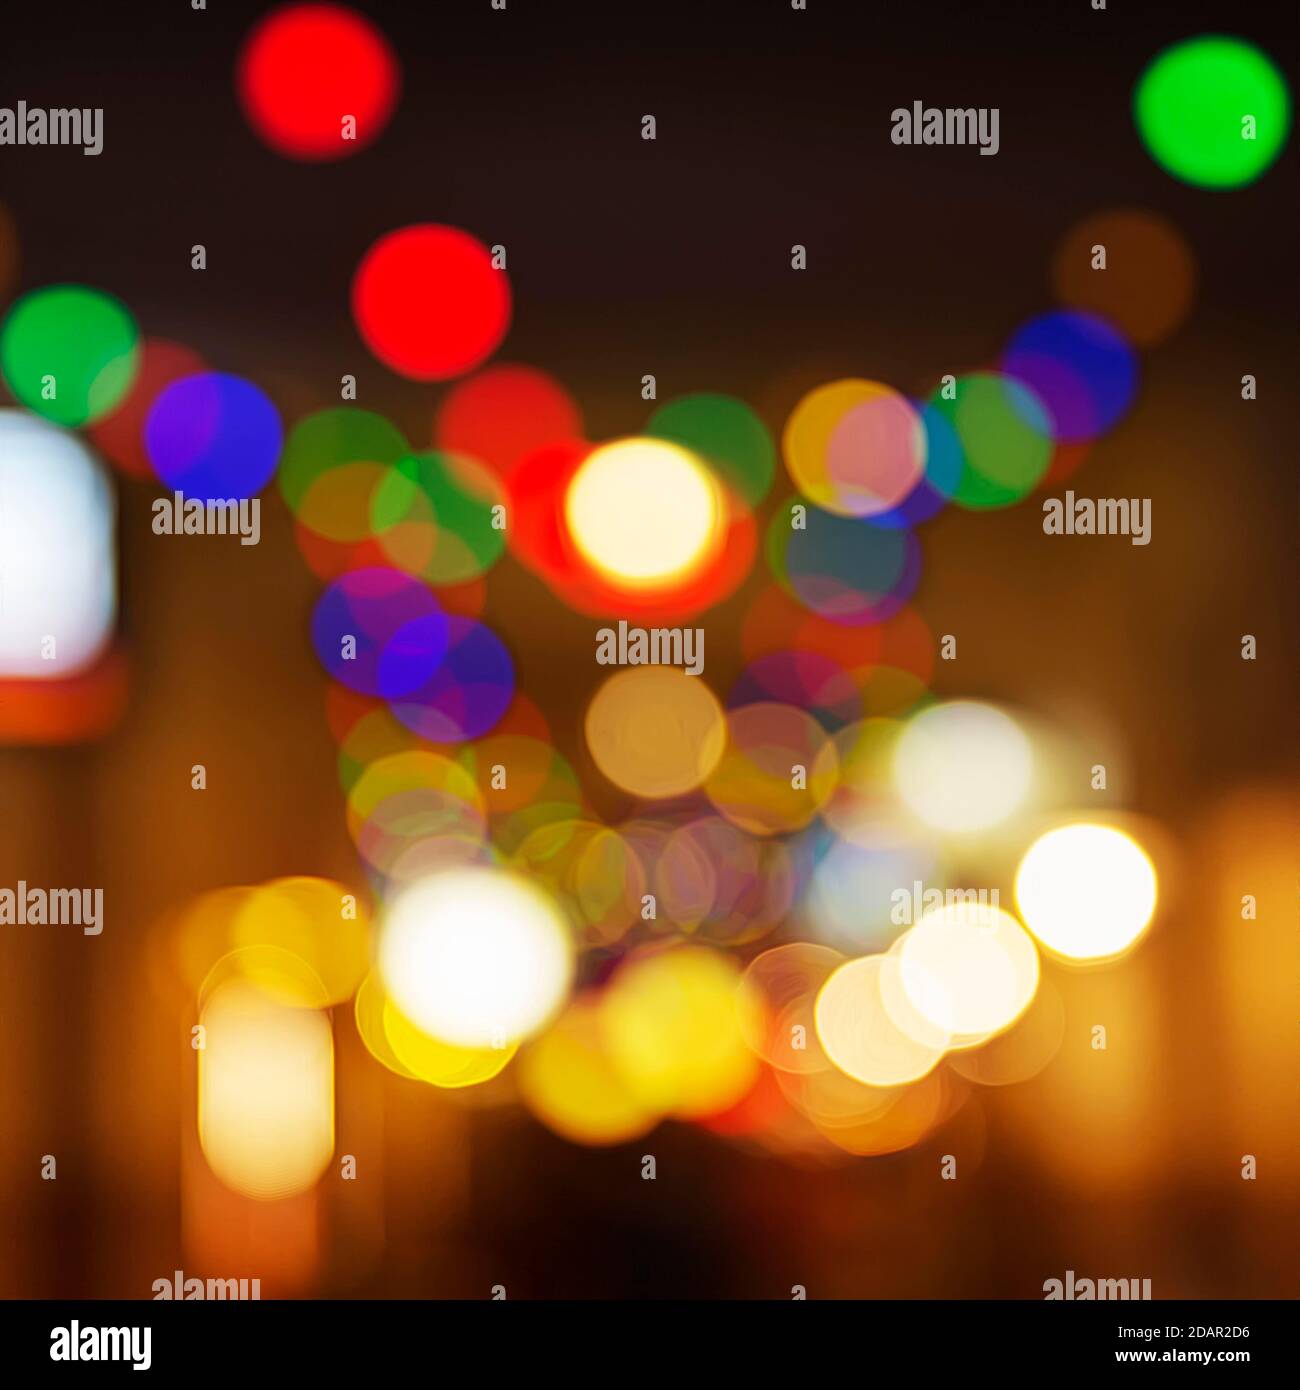 Abstract background with colored lights, motion blur, Budapest, Hungary Stock Photo